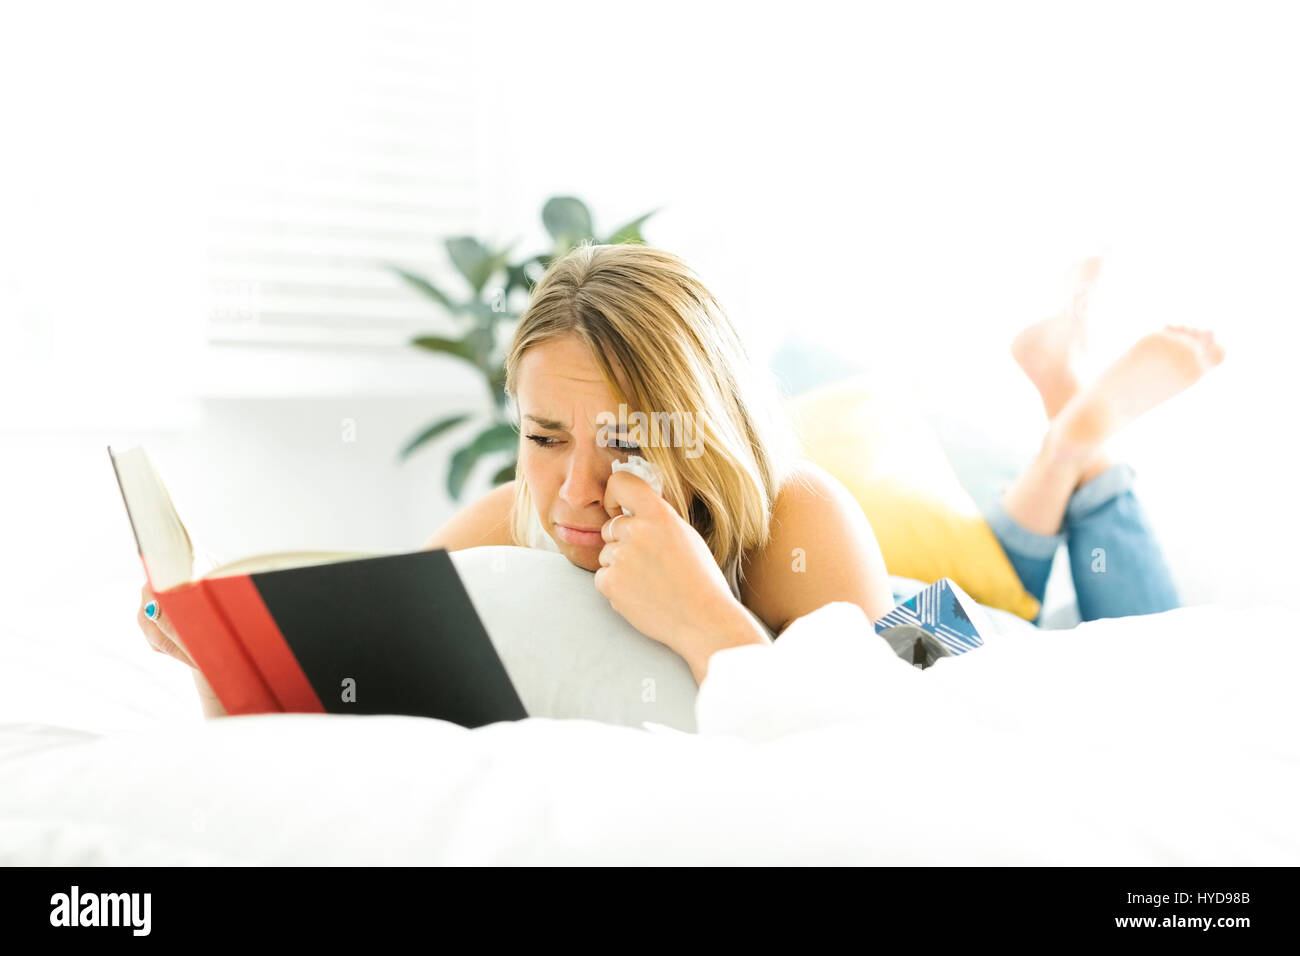 Young woman reading book and crying Stock Photo